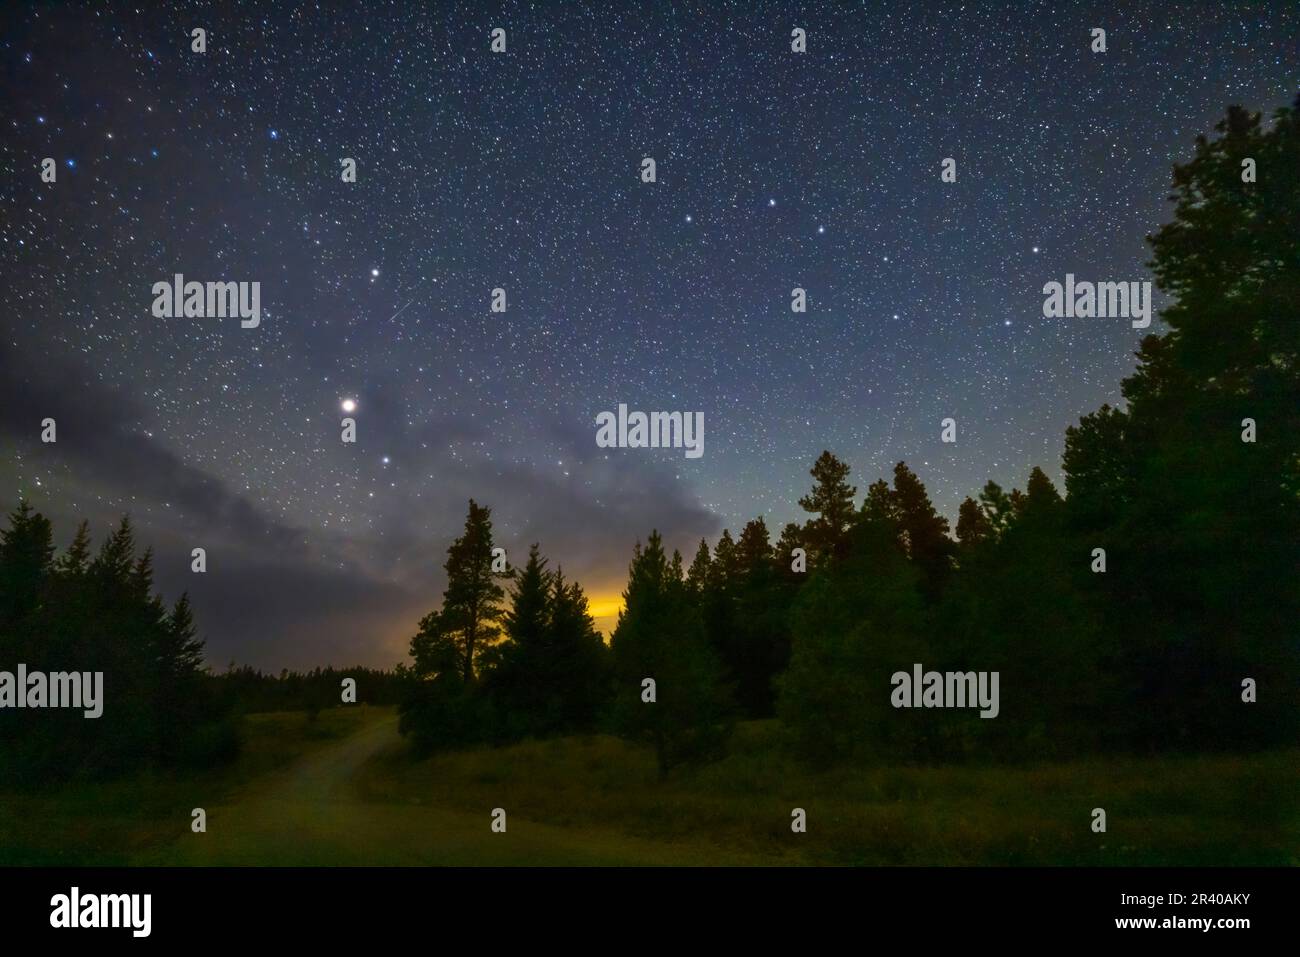 The Big Dipper and Arcturus over a treed nightscape in the Cypress Hills, Saskatchewan, Canada. Stock Photo